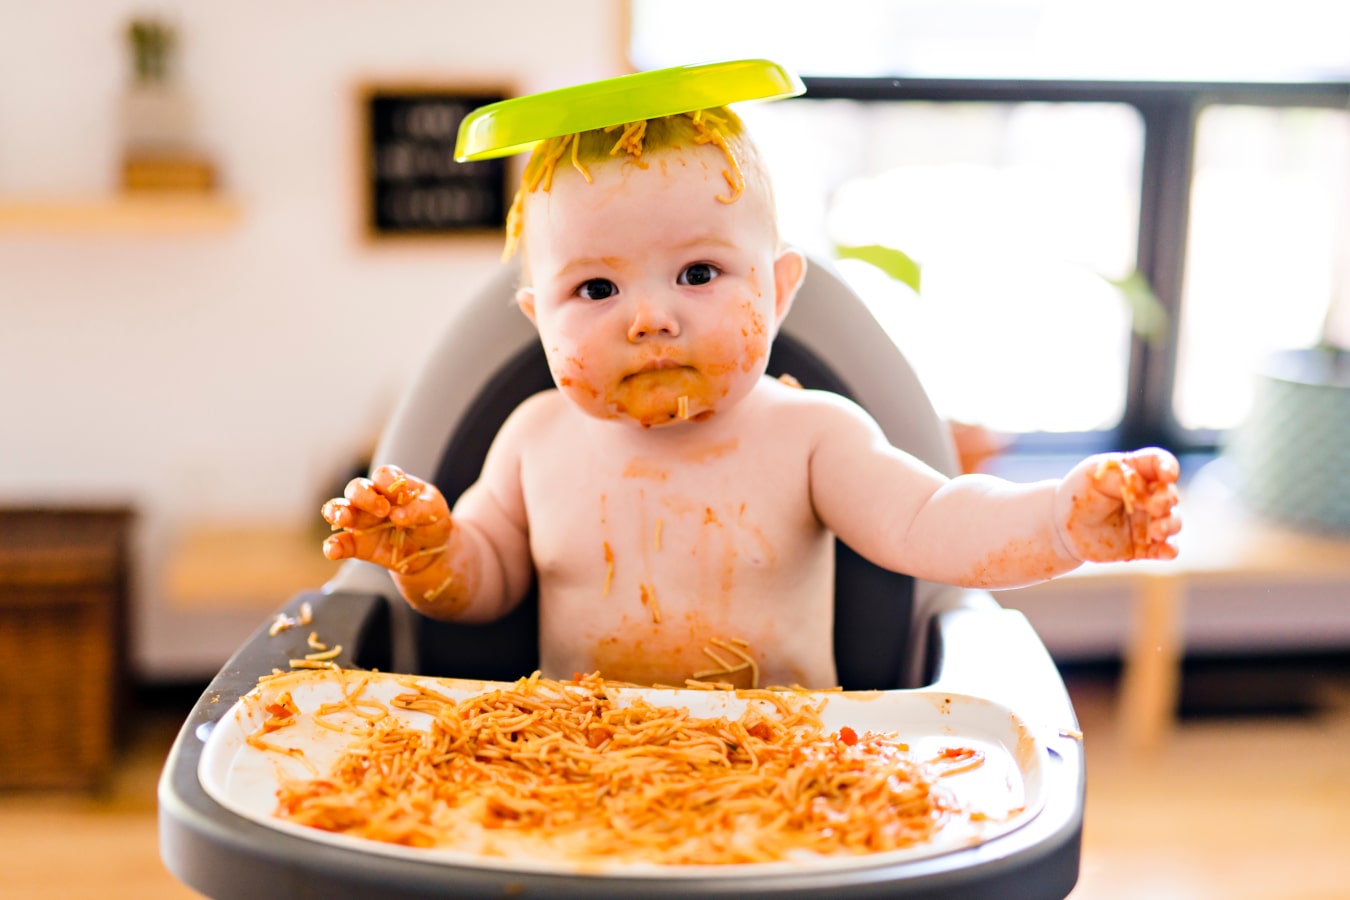 Dirty from spaghetti child, sits in a feeding chair, has a plate with food on the head.